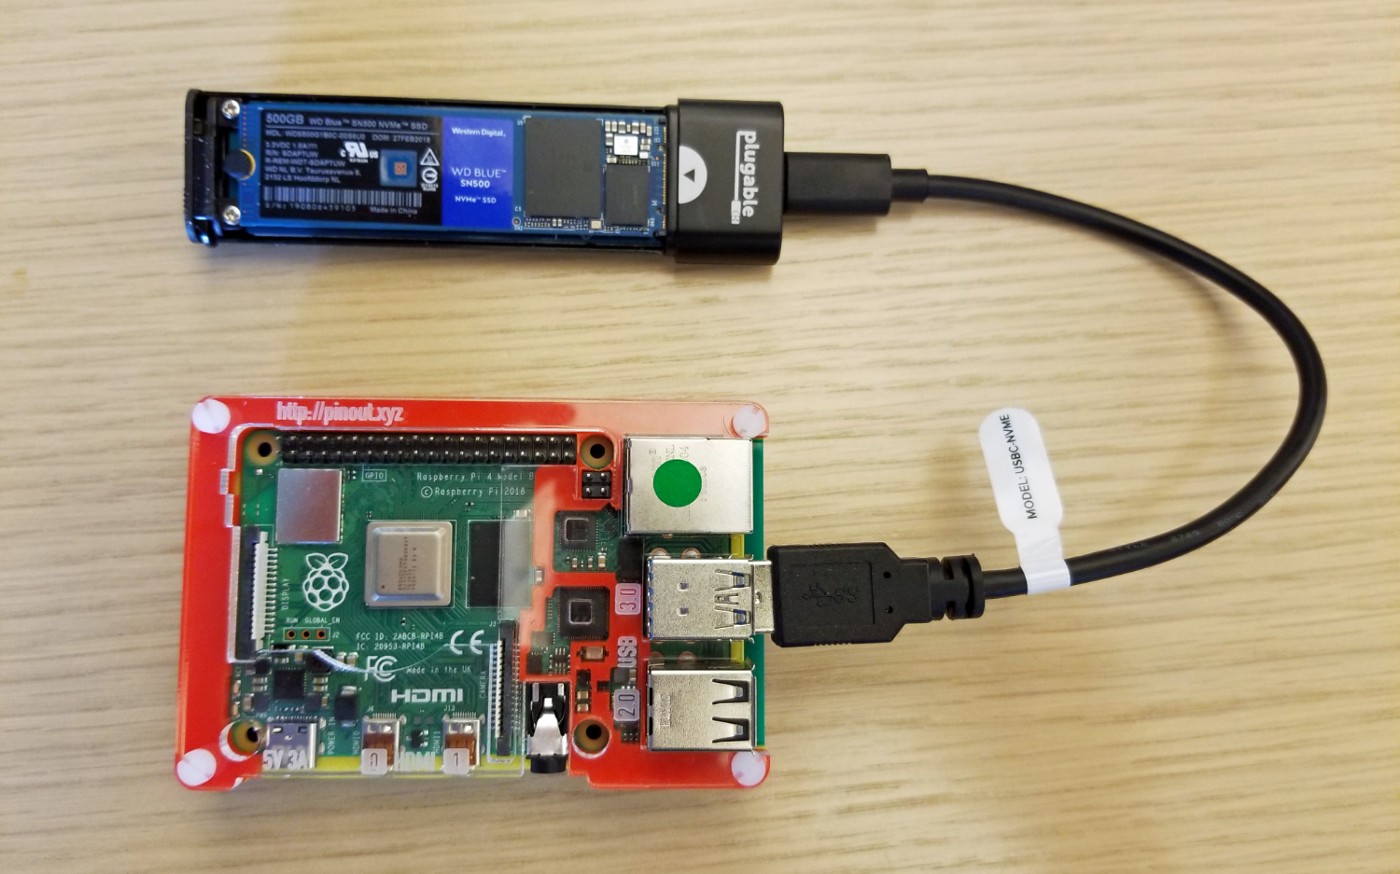 A Raspberry Pi computer using a high performance SSD to maintain data